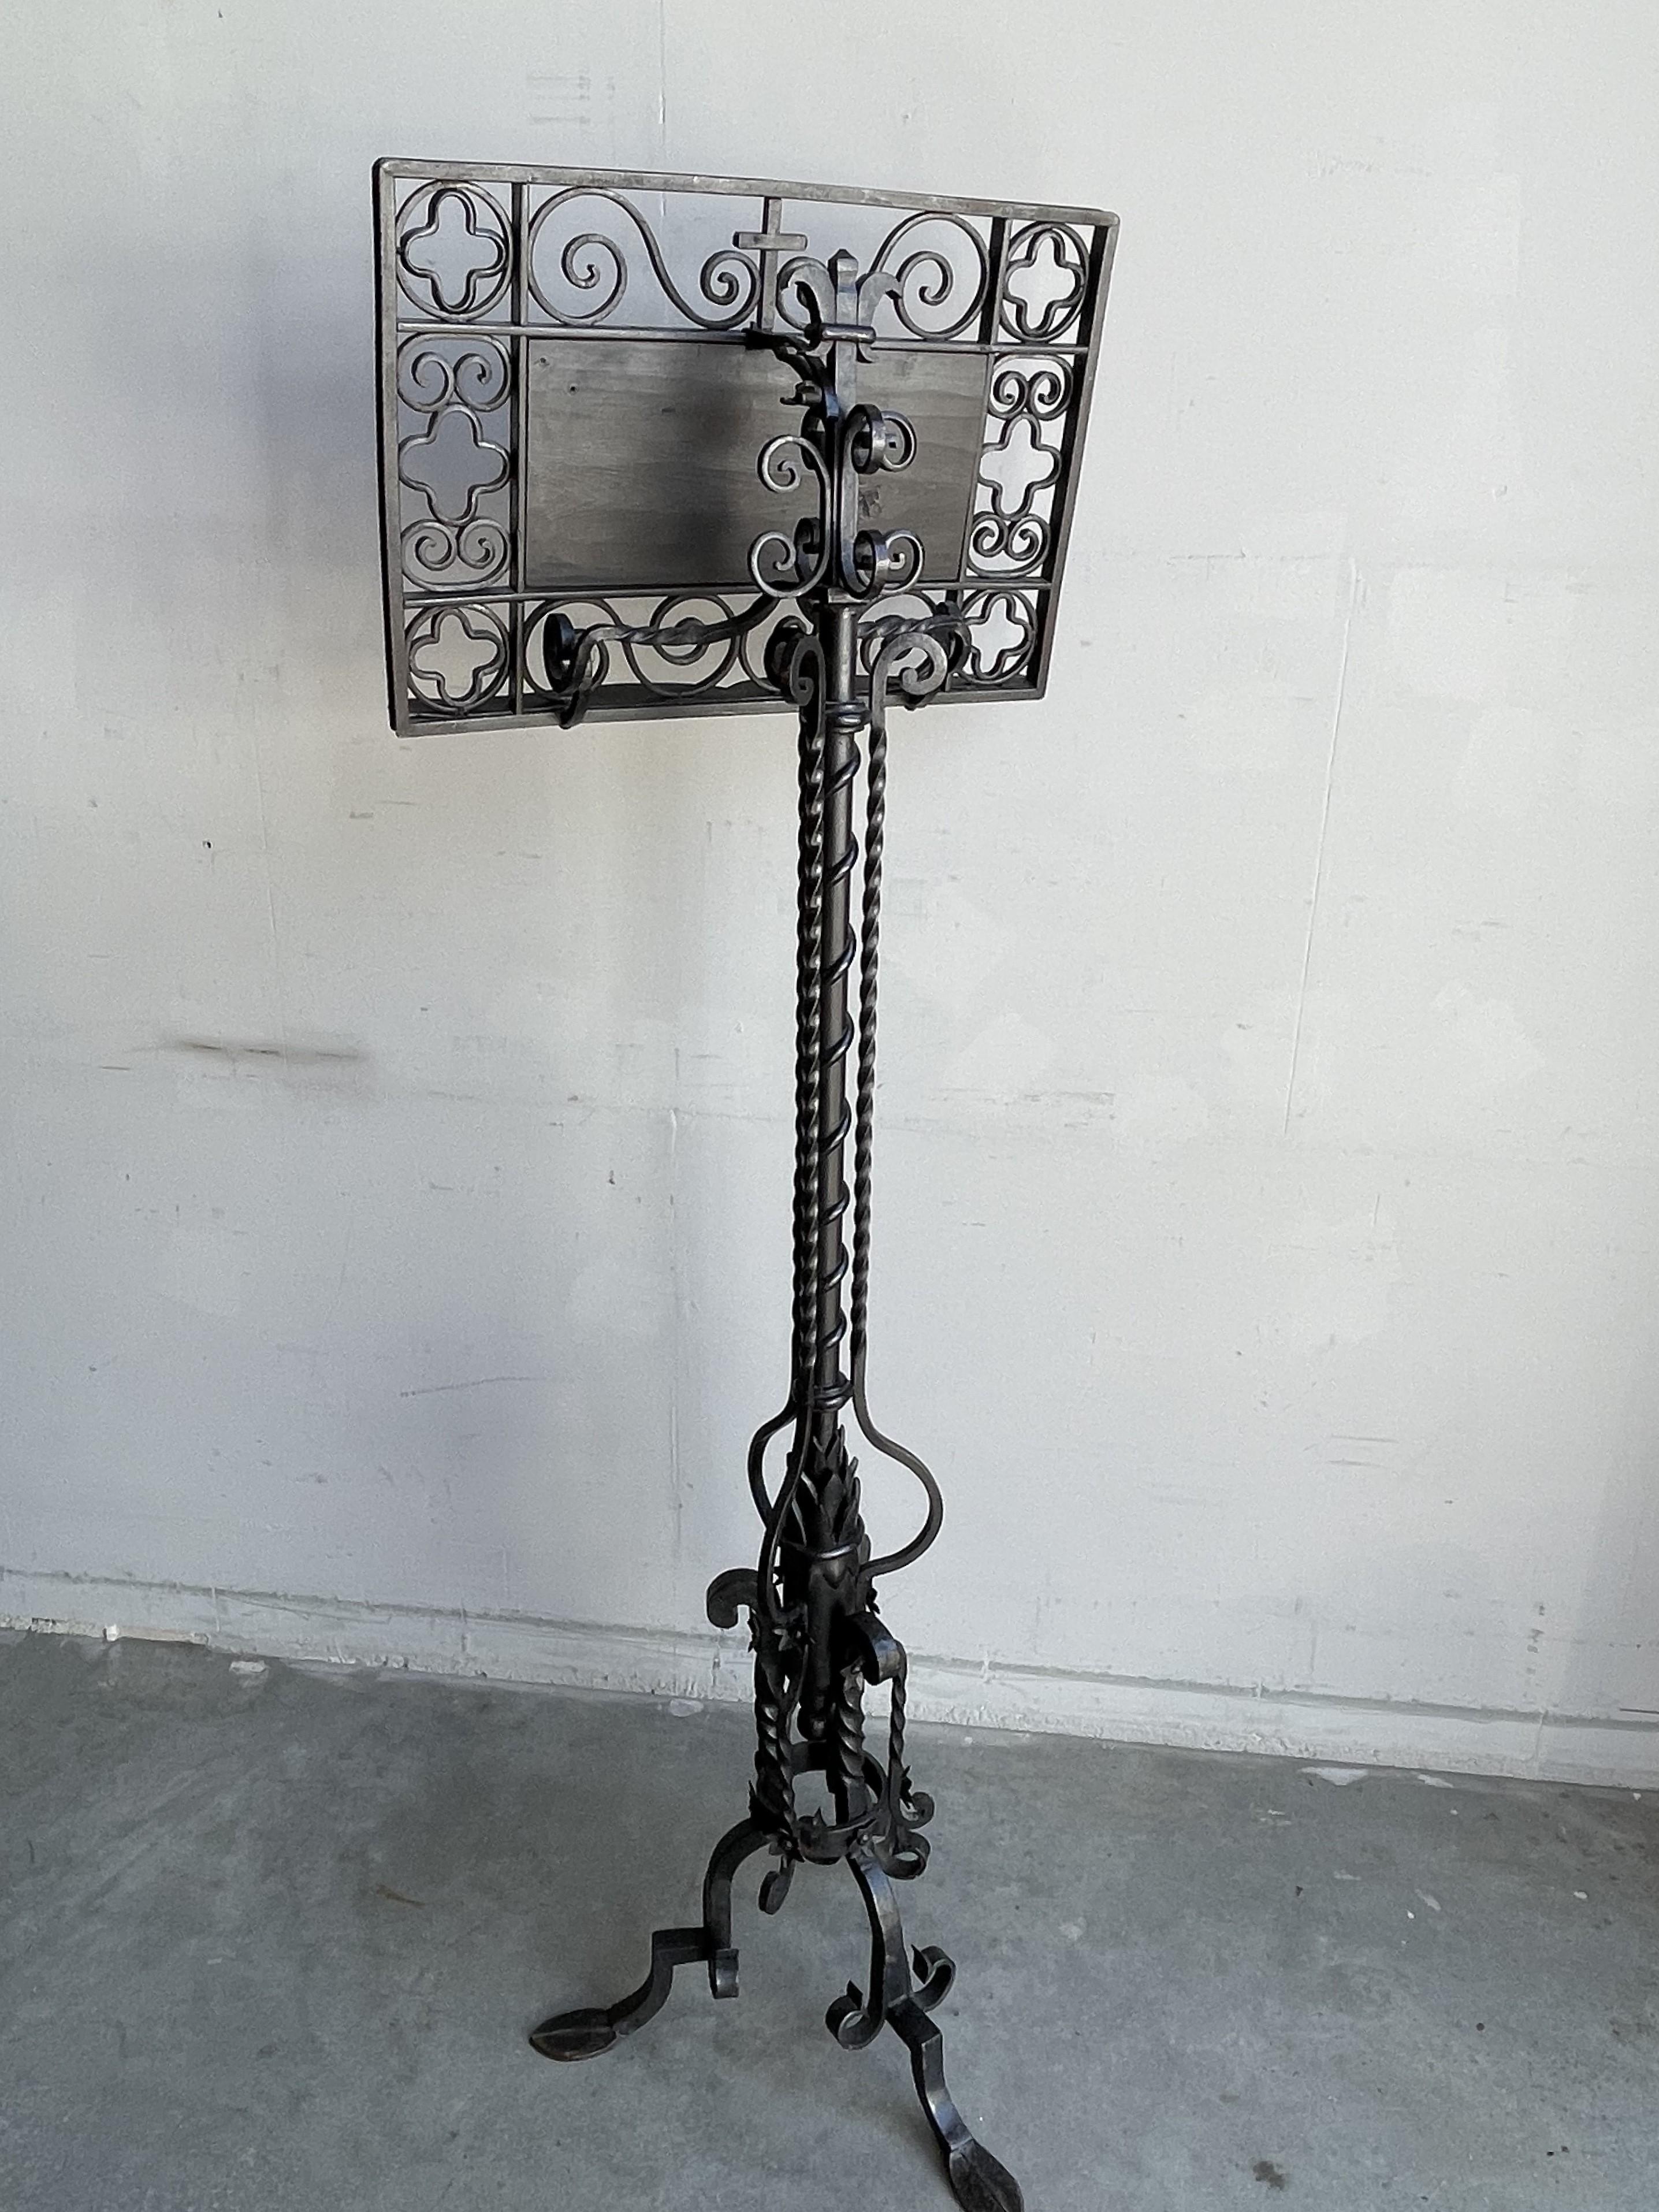 20th Century Antique & Rare, Wrought Iron Gothic Revival Floor Lectern / Bible and Book Stand For Sale